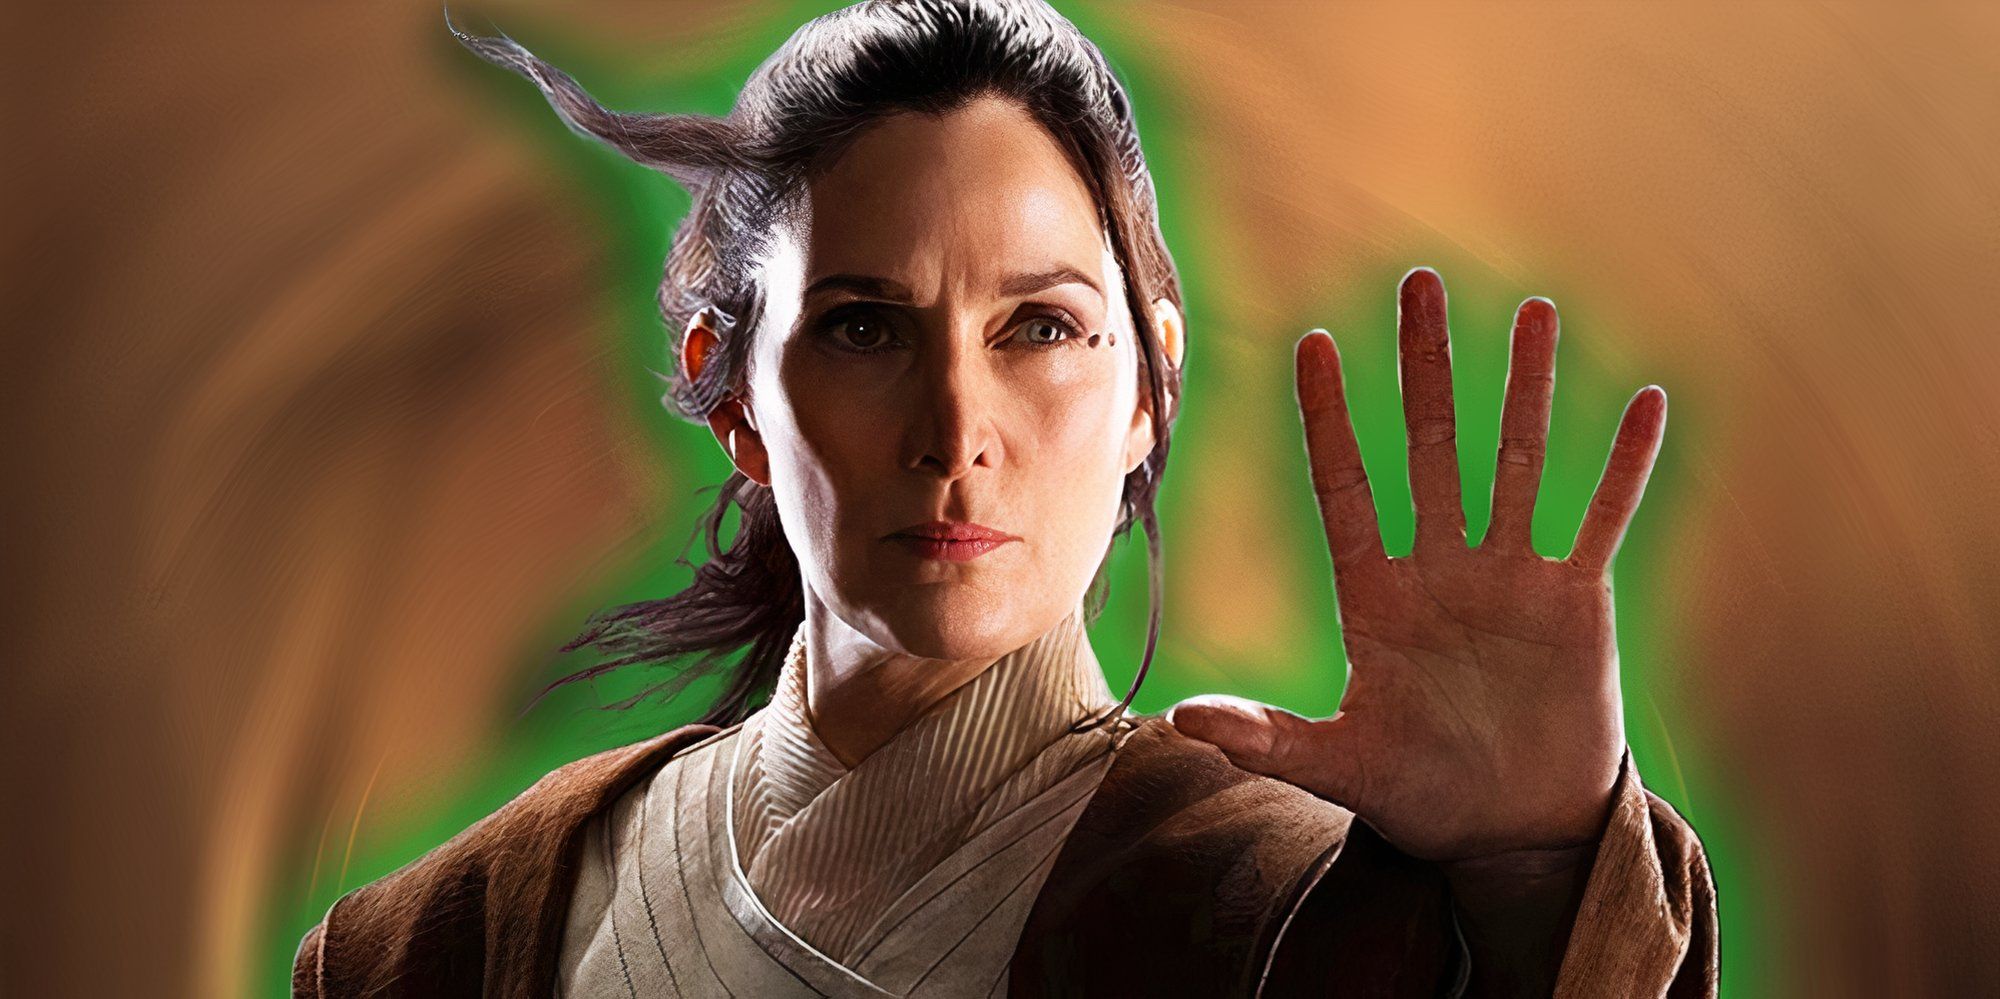 Carrie-Anne Moss' Master Indara holds her hand up to use the Force